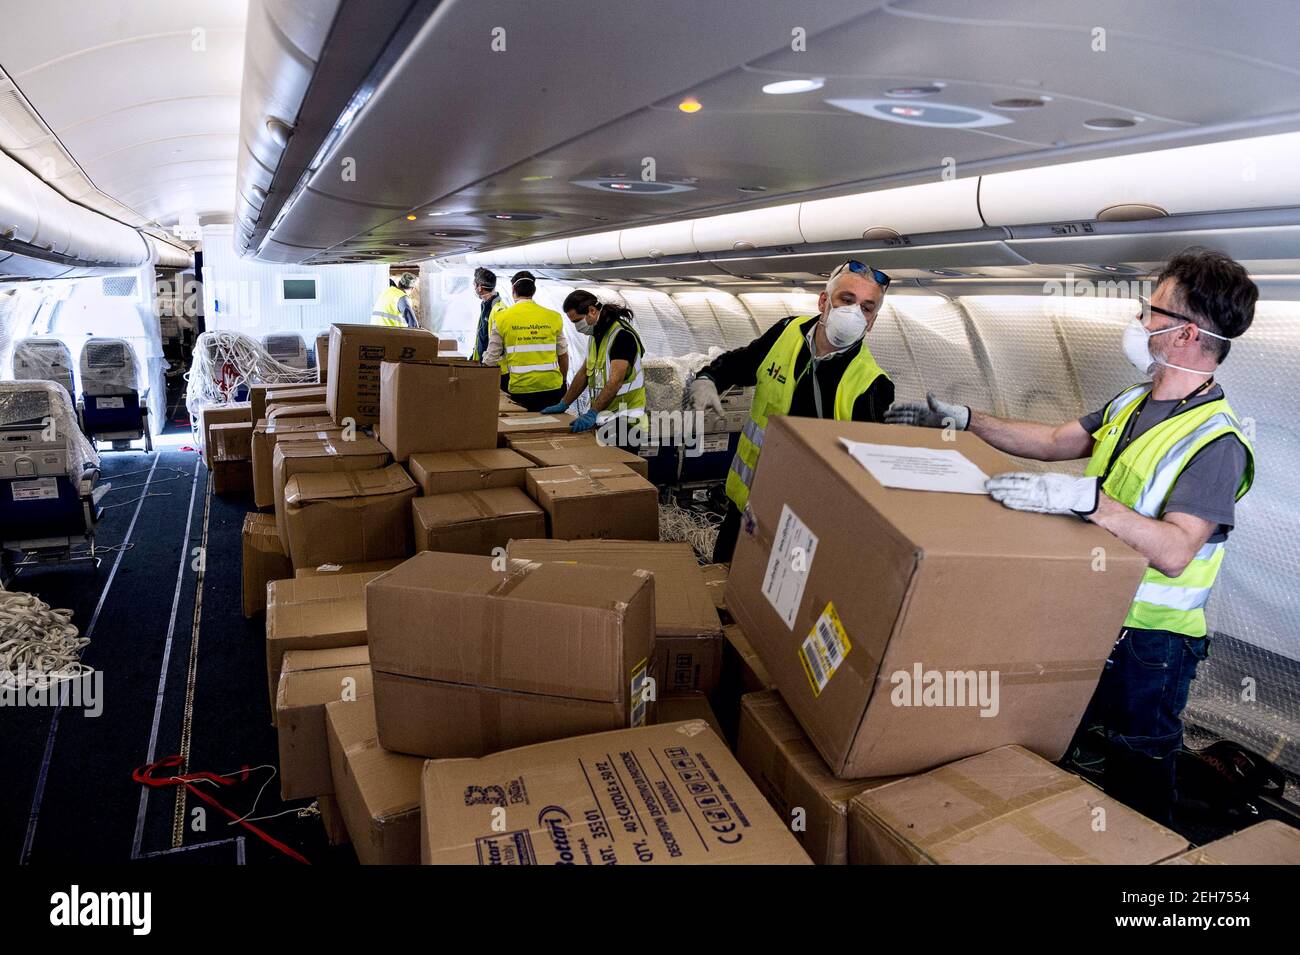 Milan, Italy. 19th Feb, 2021. Milan March 2020, Milan Malpensa airport, masks from China arriving on airliners transformed into cargo planes Editorial Usage Only Credit: Independent Photo Agency/Alamy Live News Stock Photo